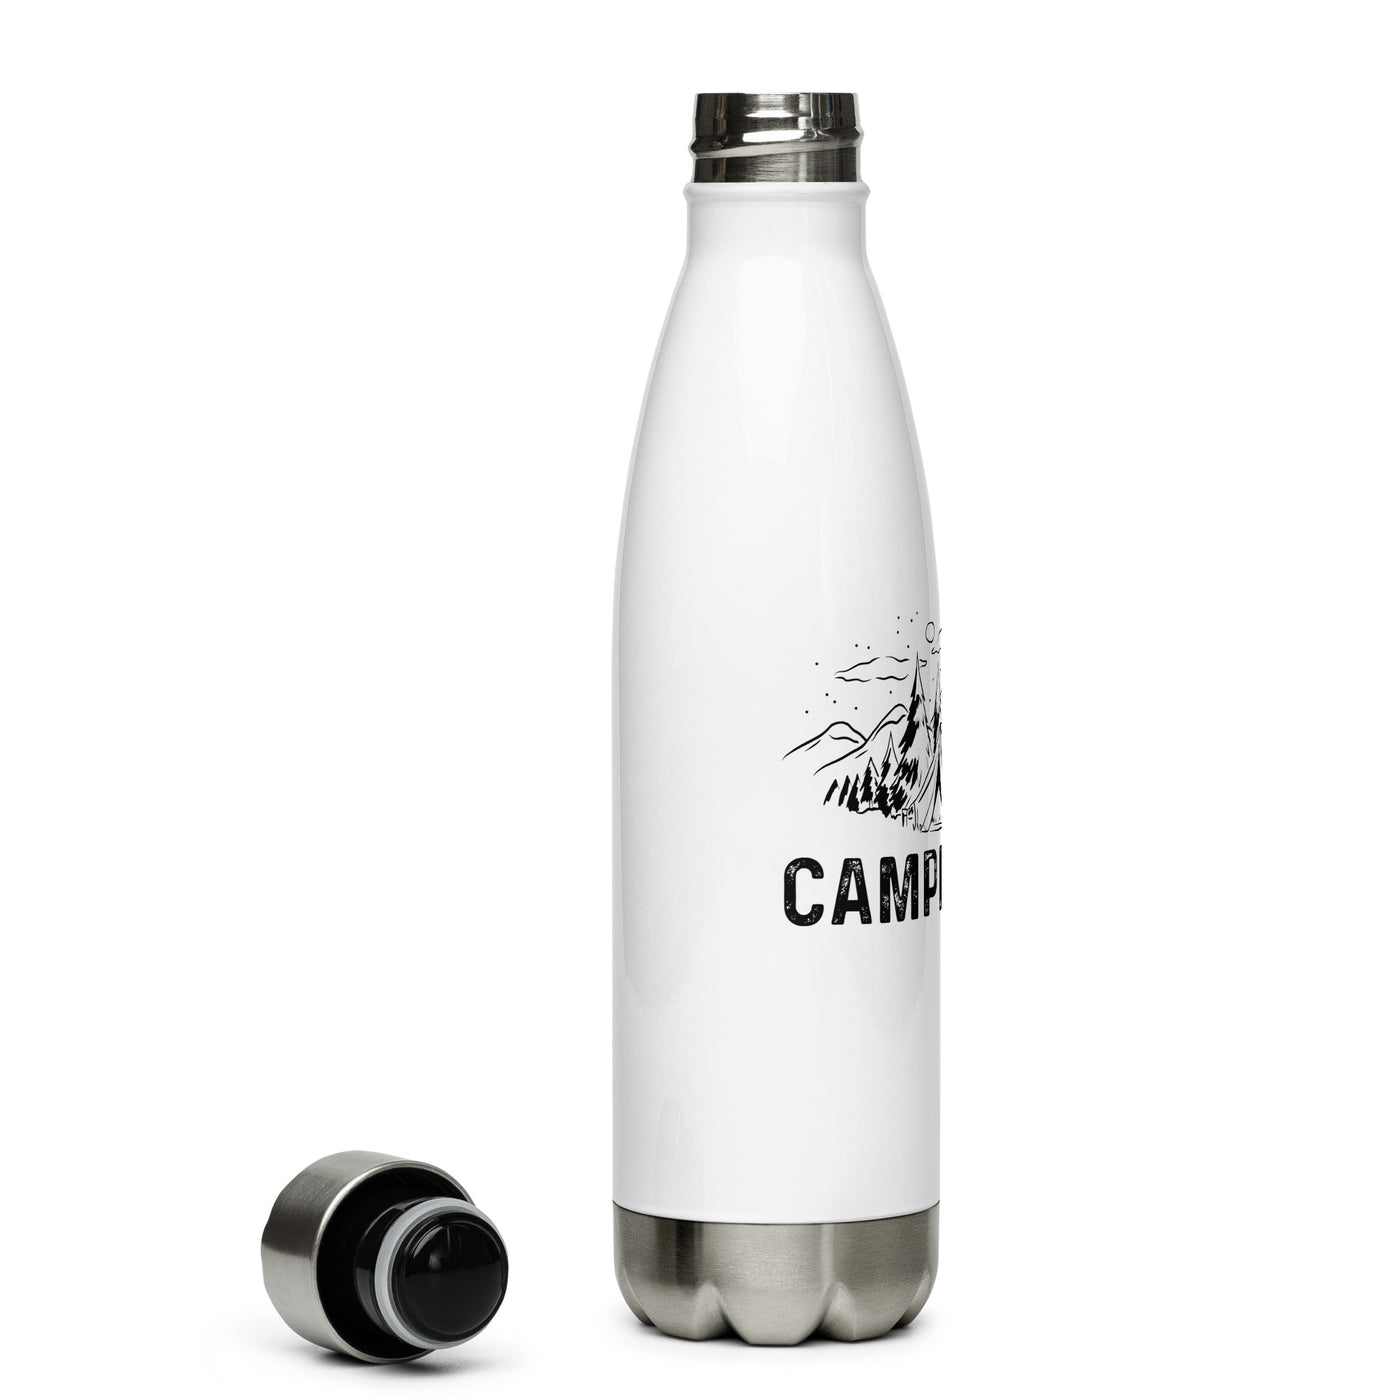 Camping Vater 2 - Edelstahl Trinkflasche camping